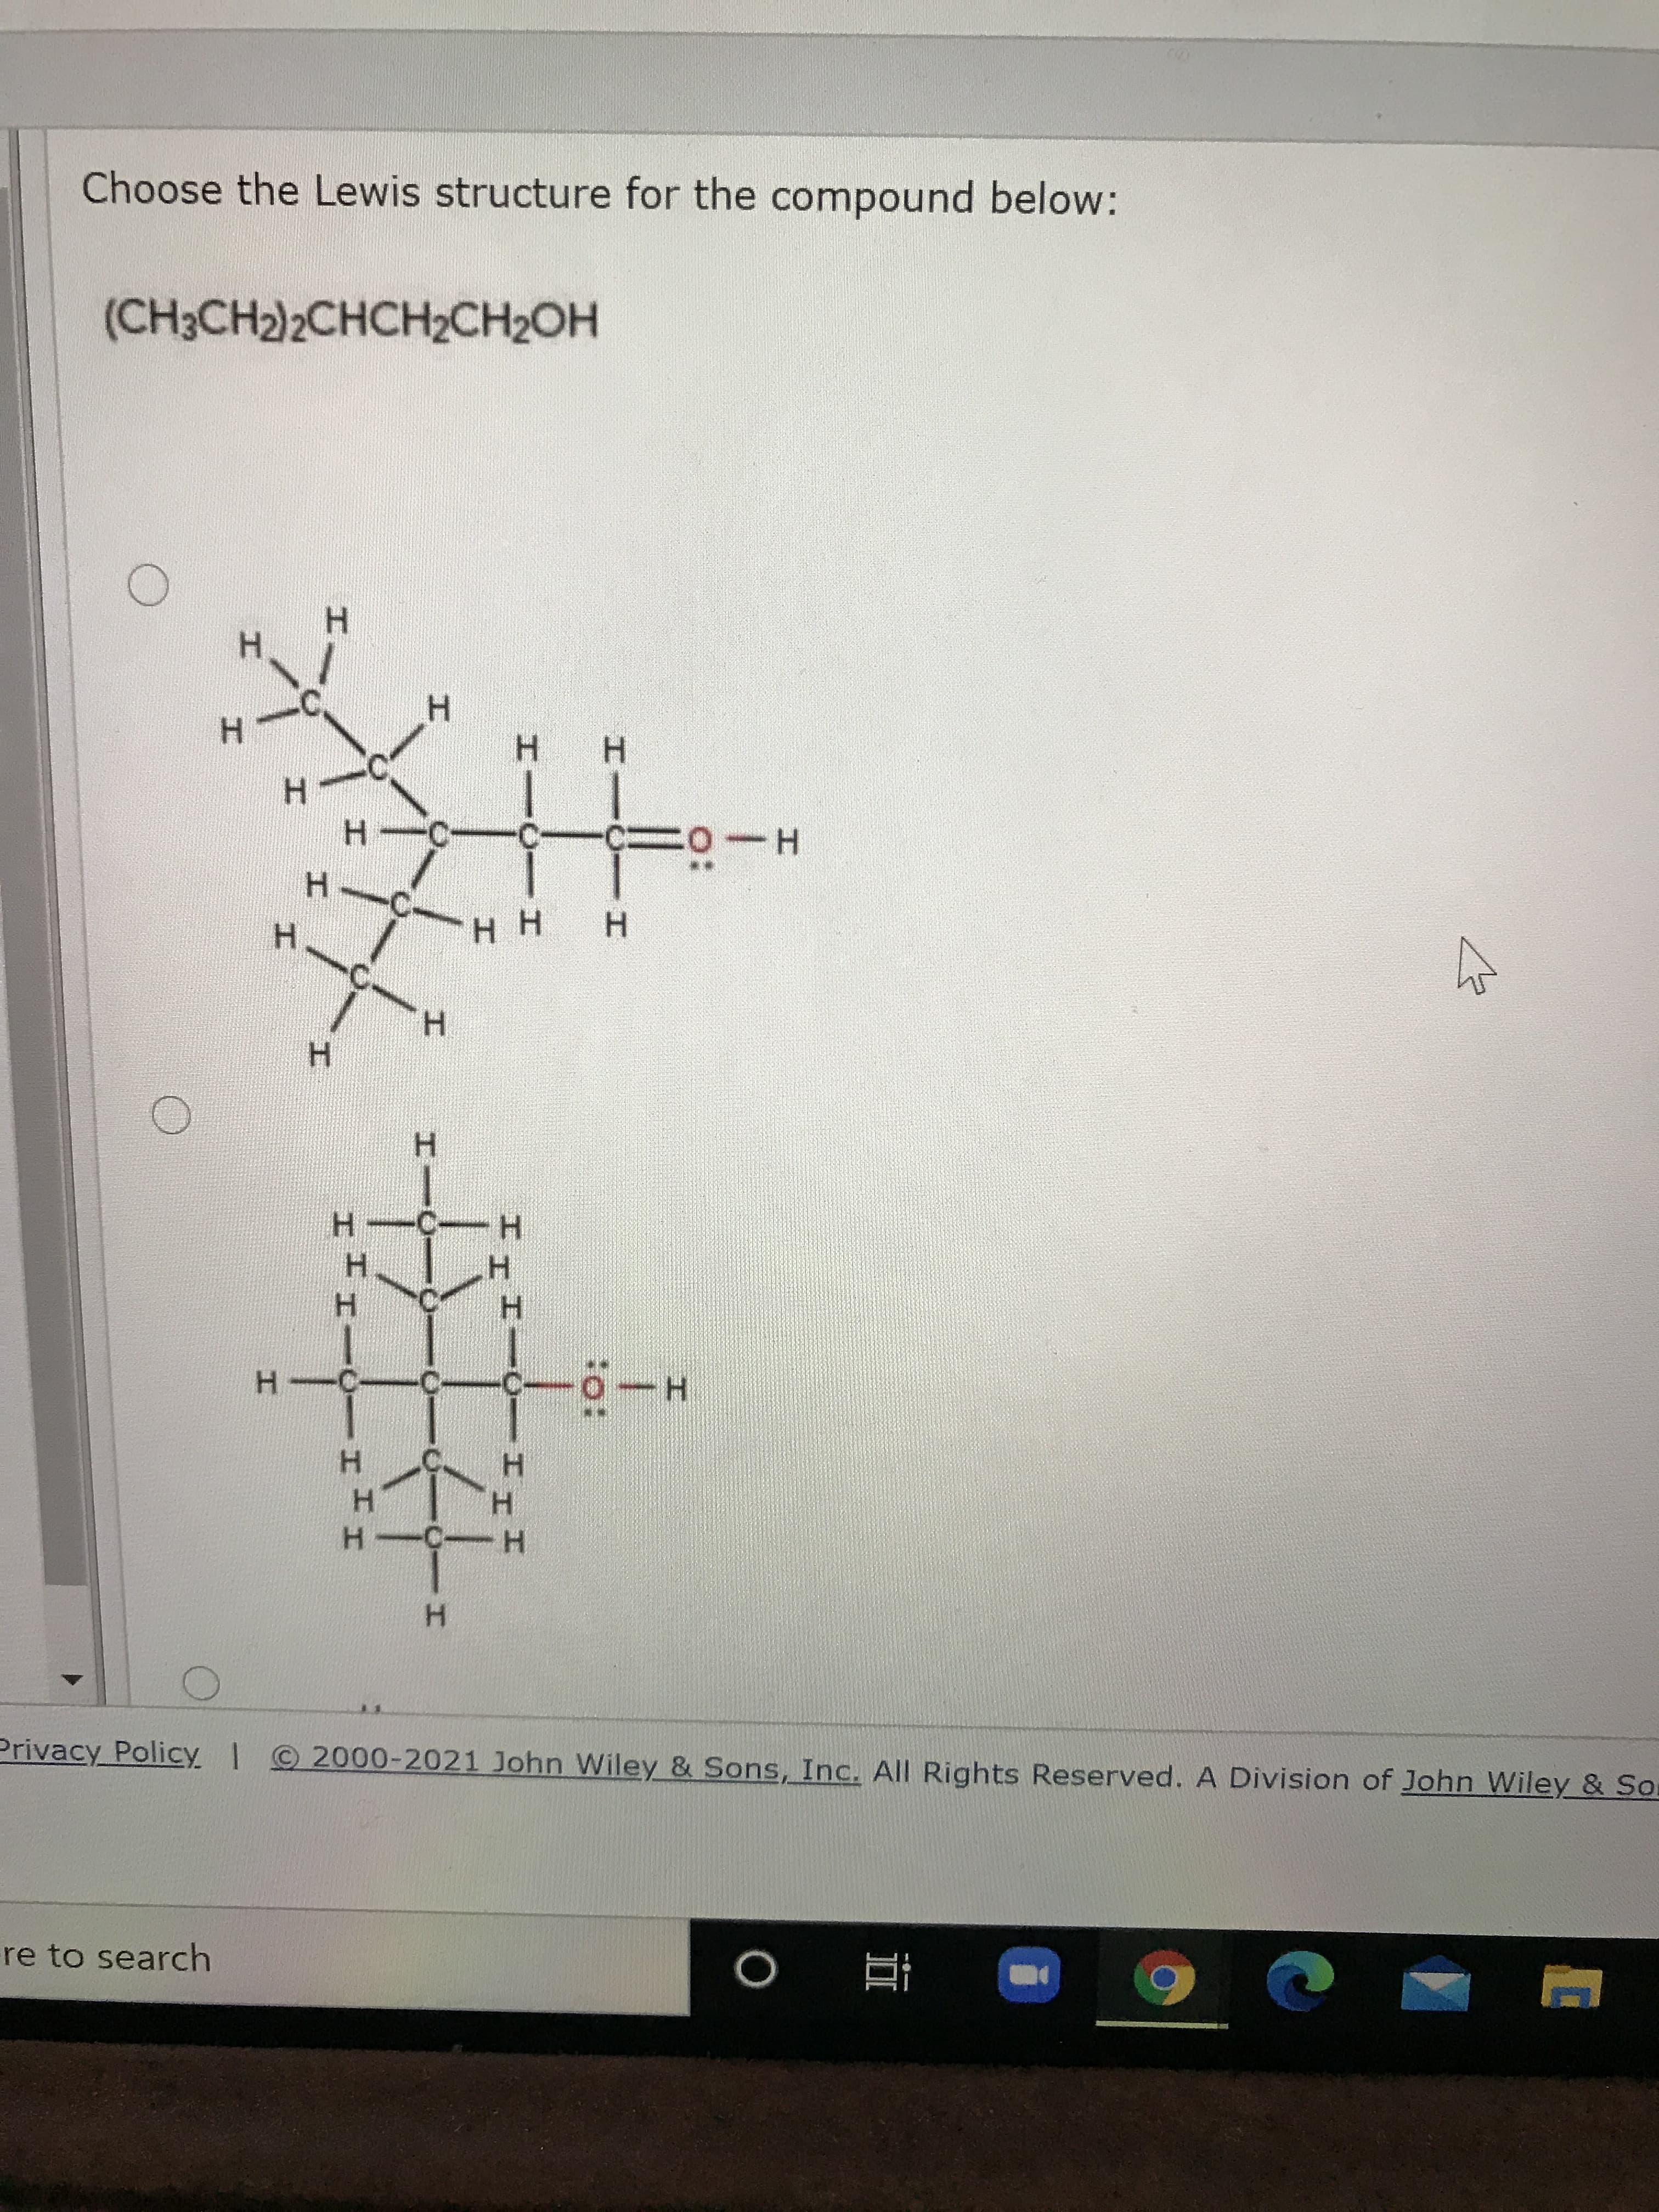 Choose the Lewis structure for the compound below:
(CH3CH2)2CHCH2CH2OH
